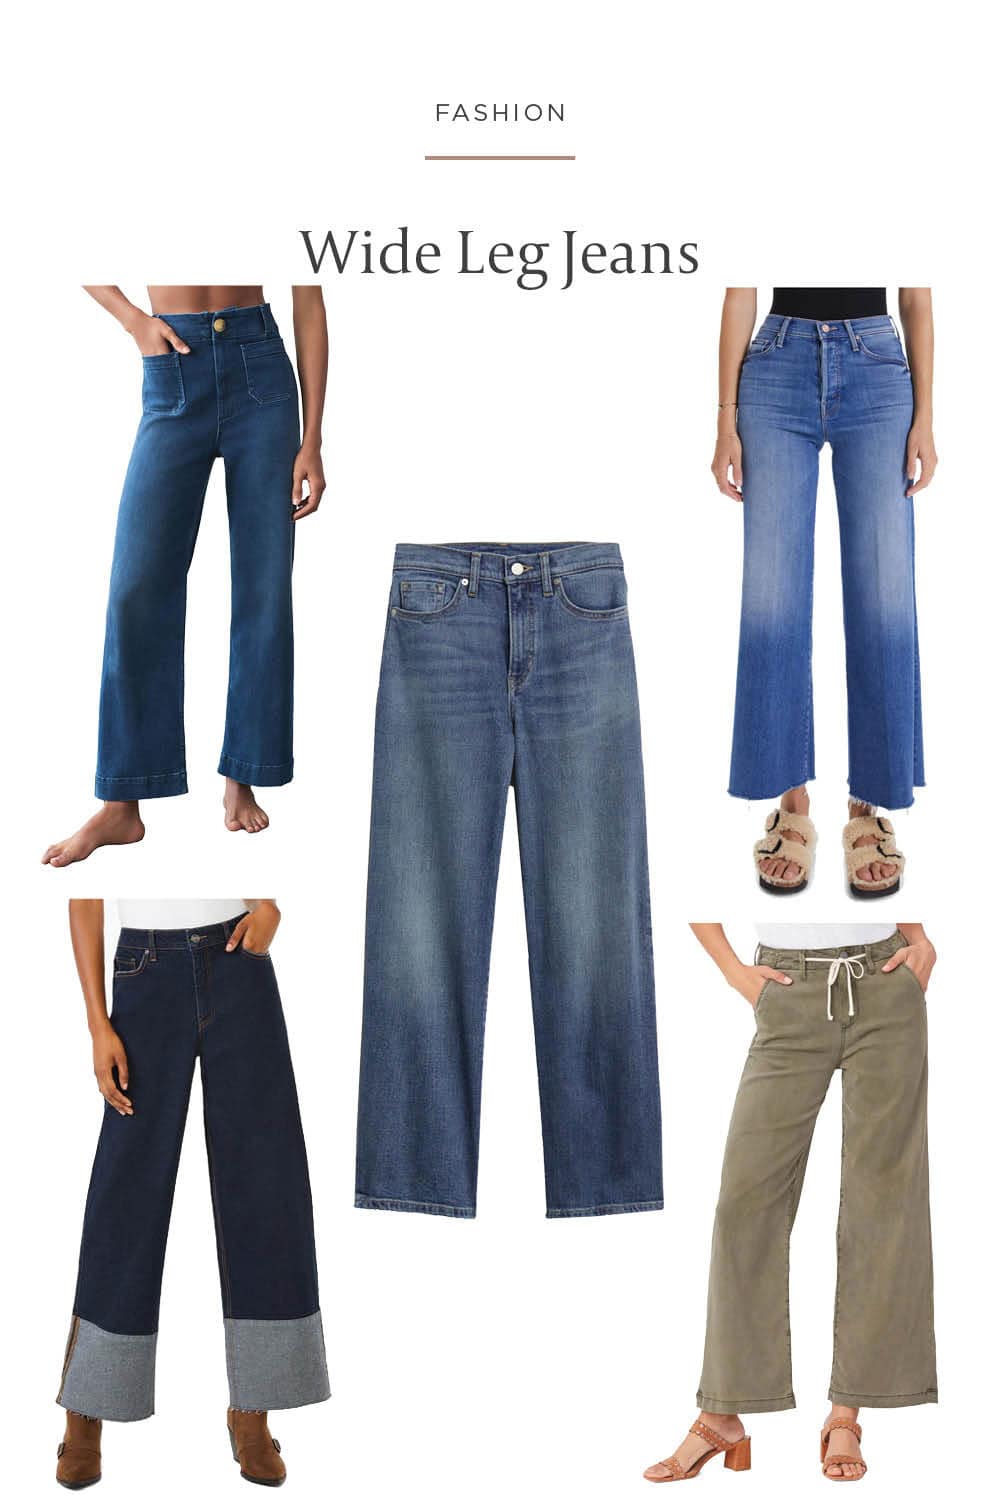 Wide Leg Jeans Are Trending